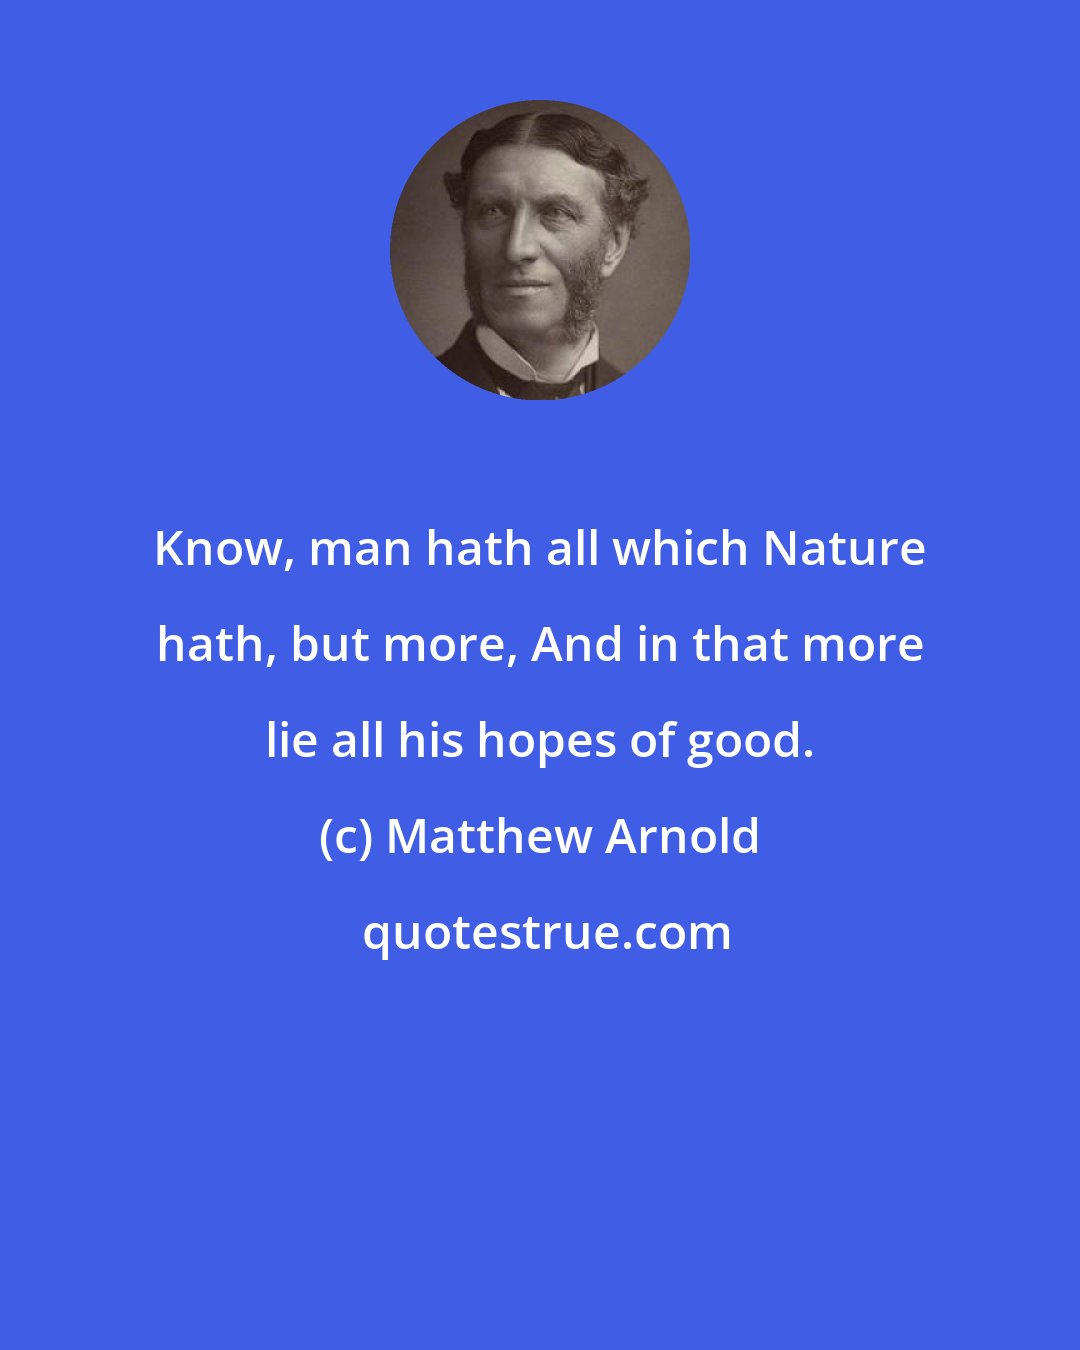 Matthew Arnold: Know, man hath all which Nature hath, but more, And in that more lie all his hopes of good.